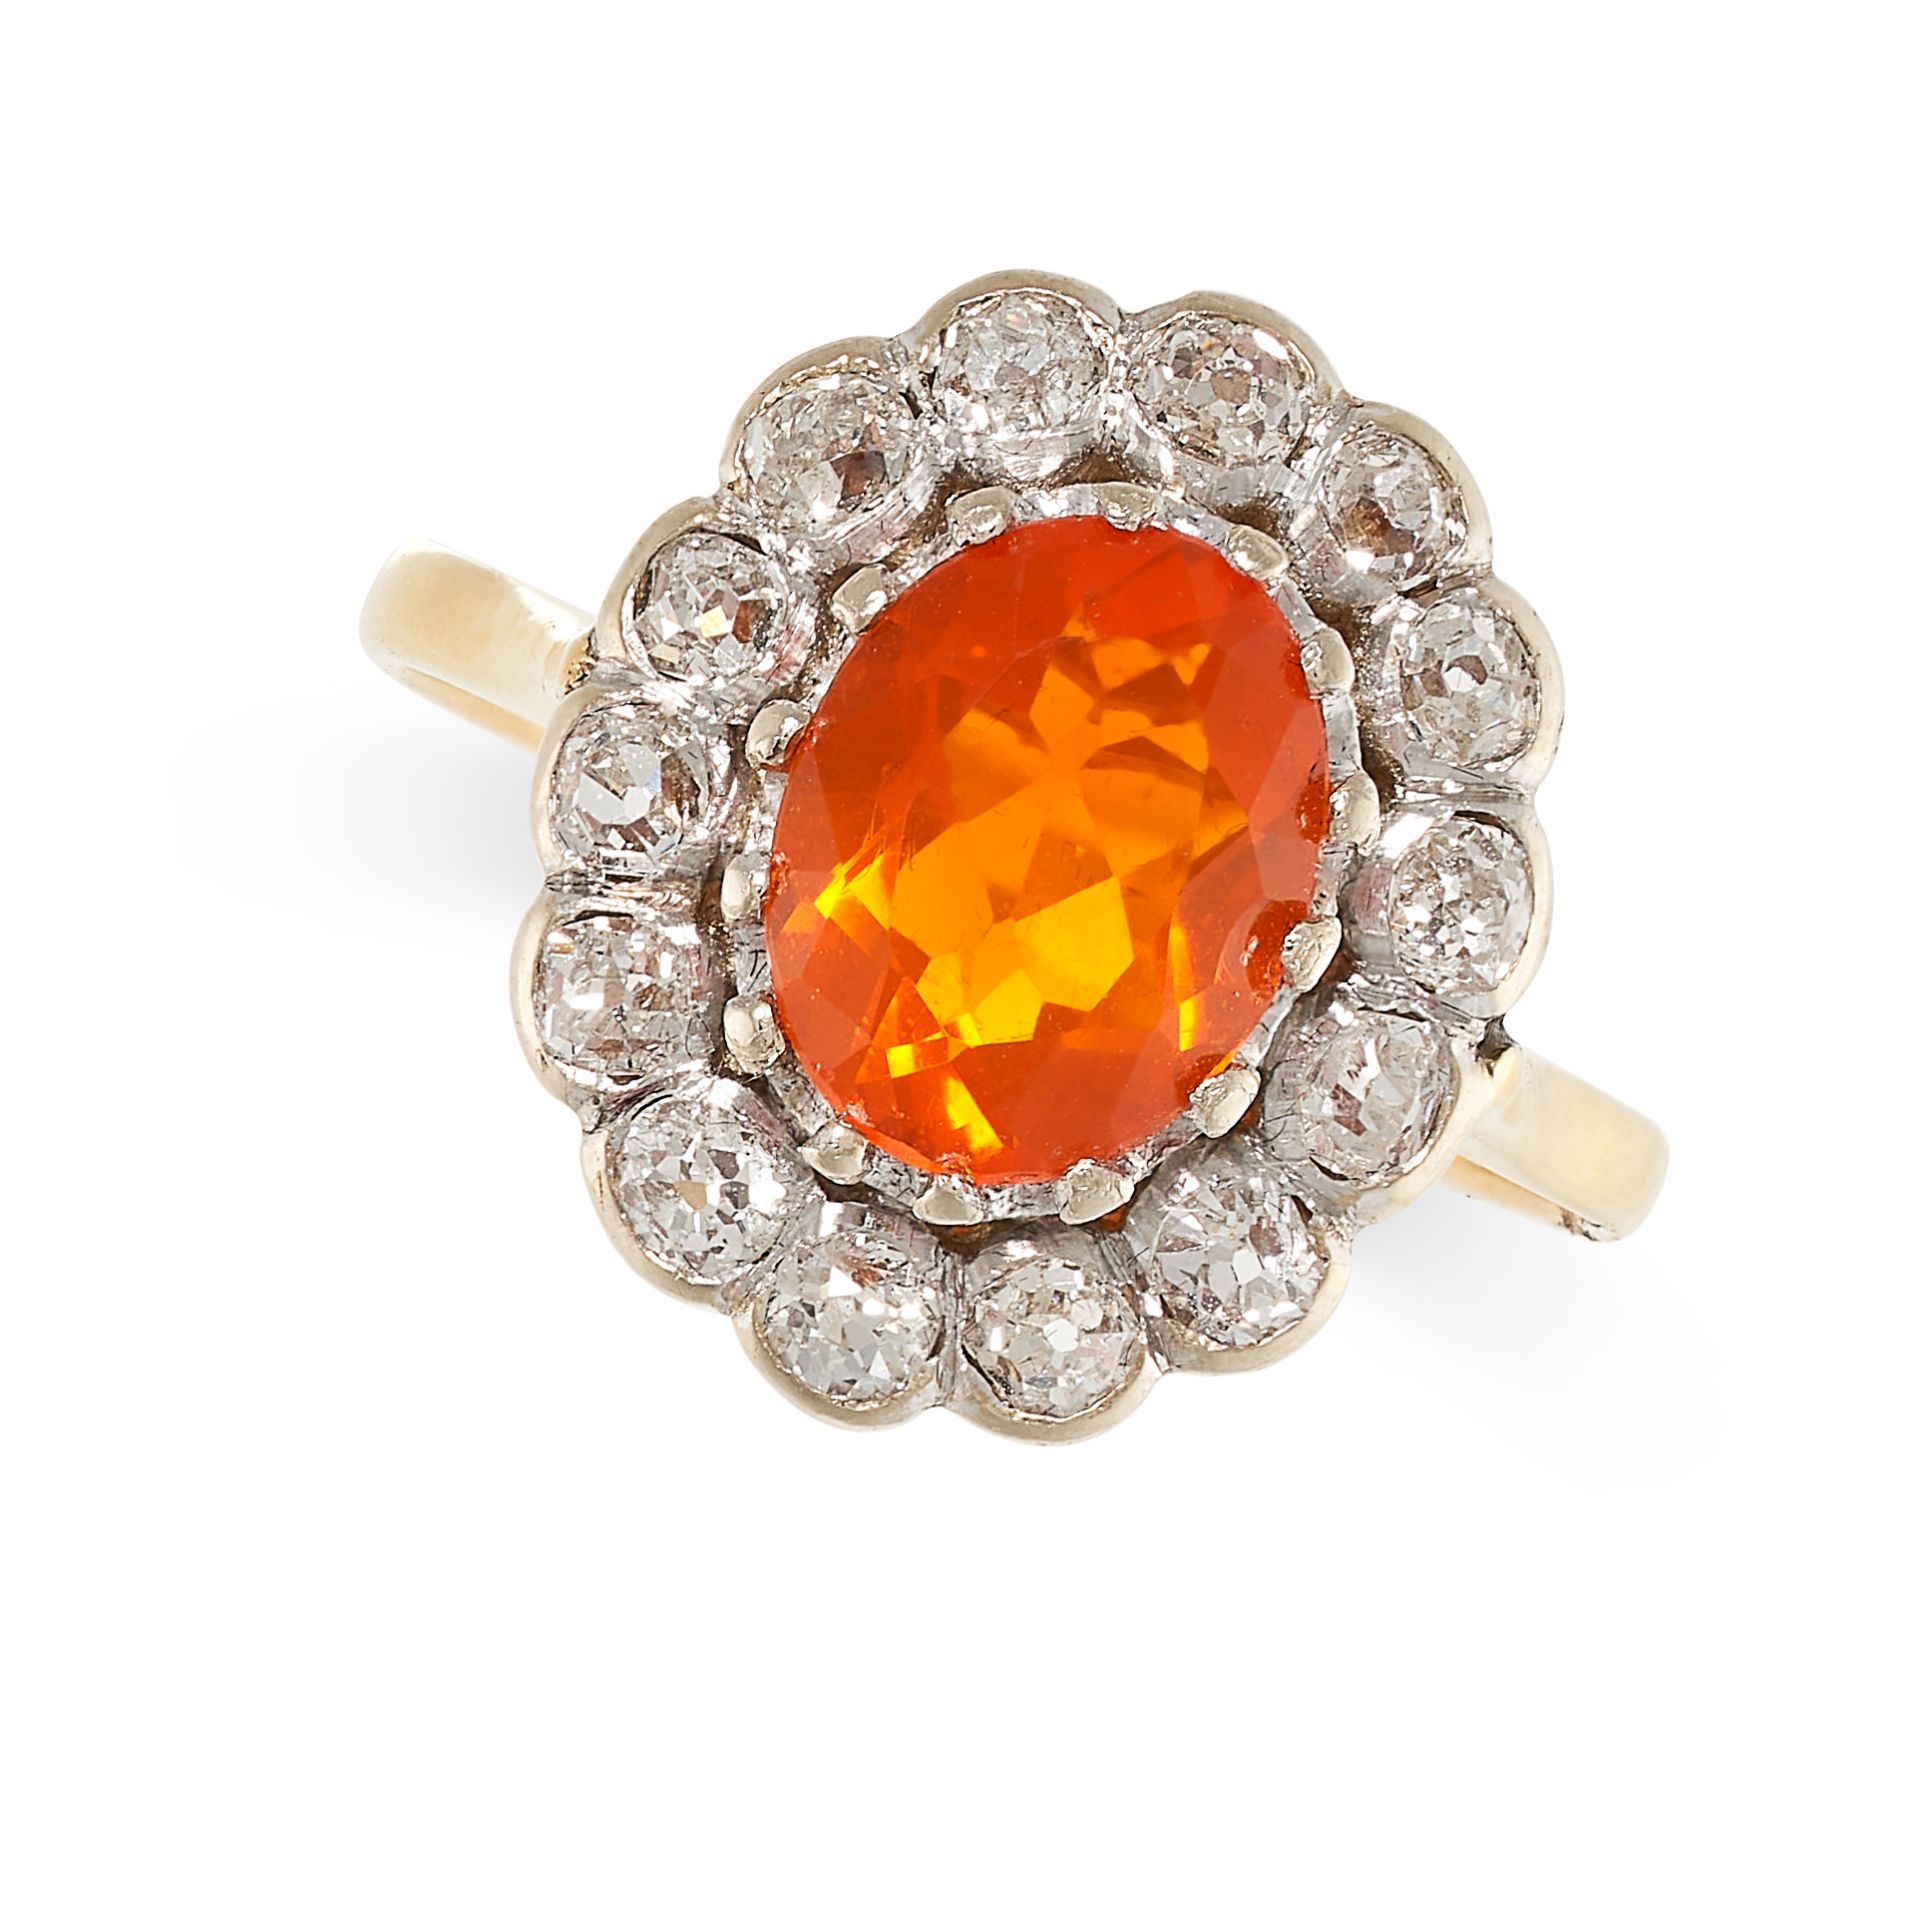 A FIRE OPAL AND DIAMOND CLUSTER RING in 18ct yellow gold, set with an oval cut fire opal in a